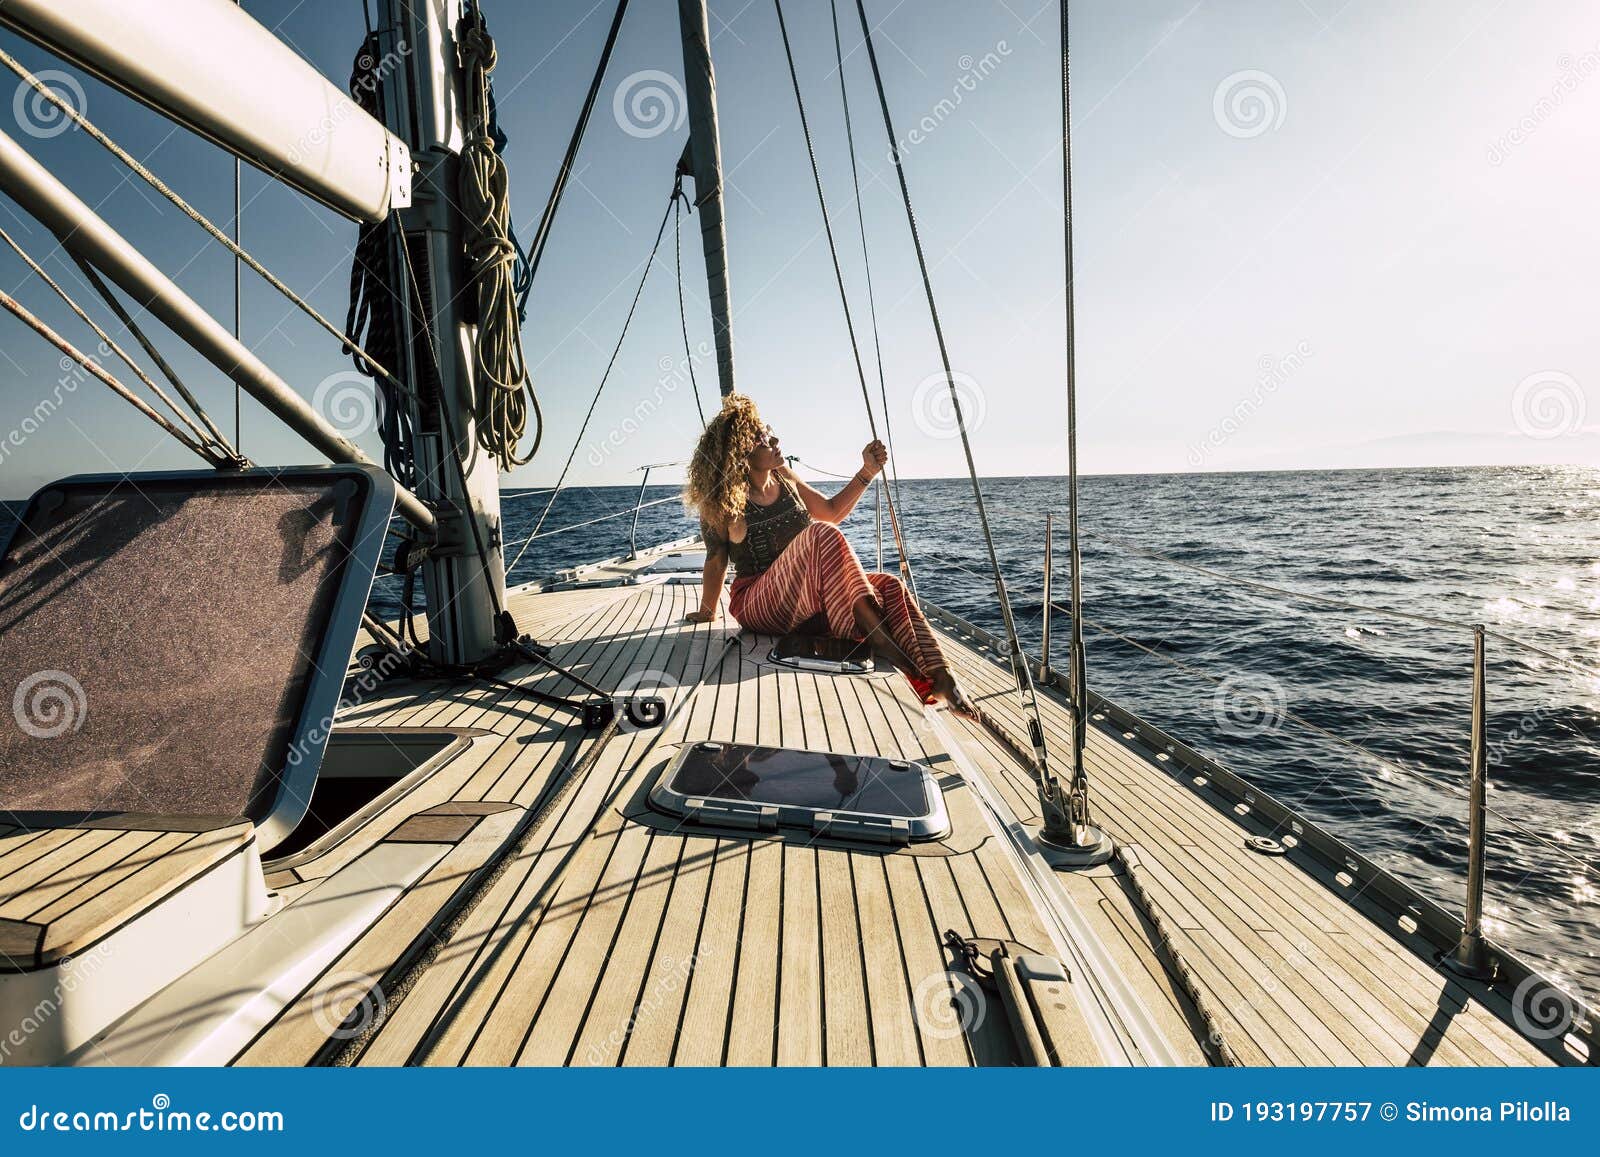 beautiful young woman enjoy summer holiday vacation or excursion on sailboat with sun and ocean around - people enjoying life and